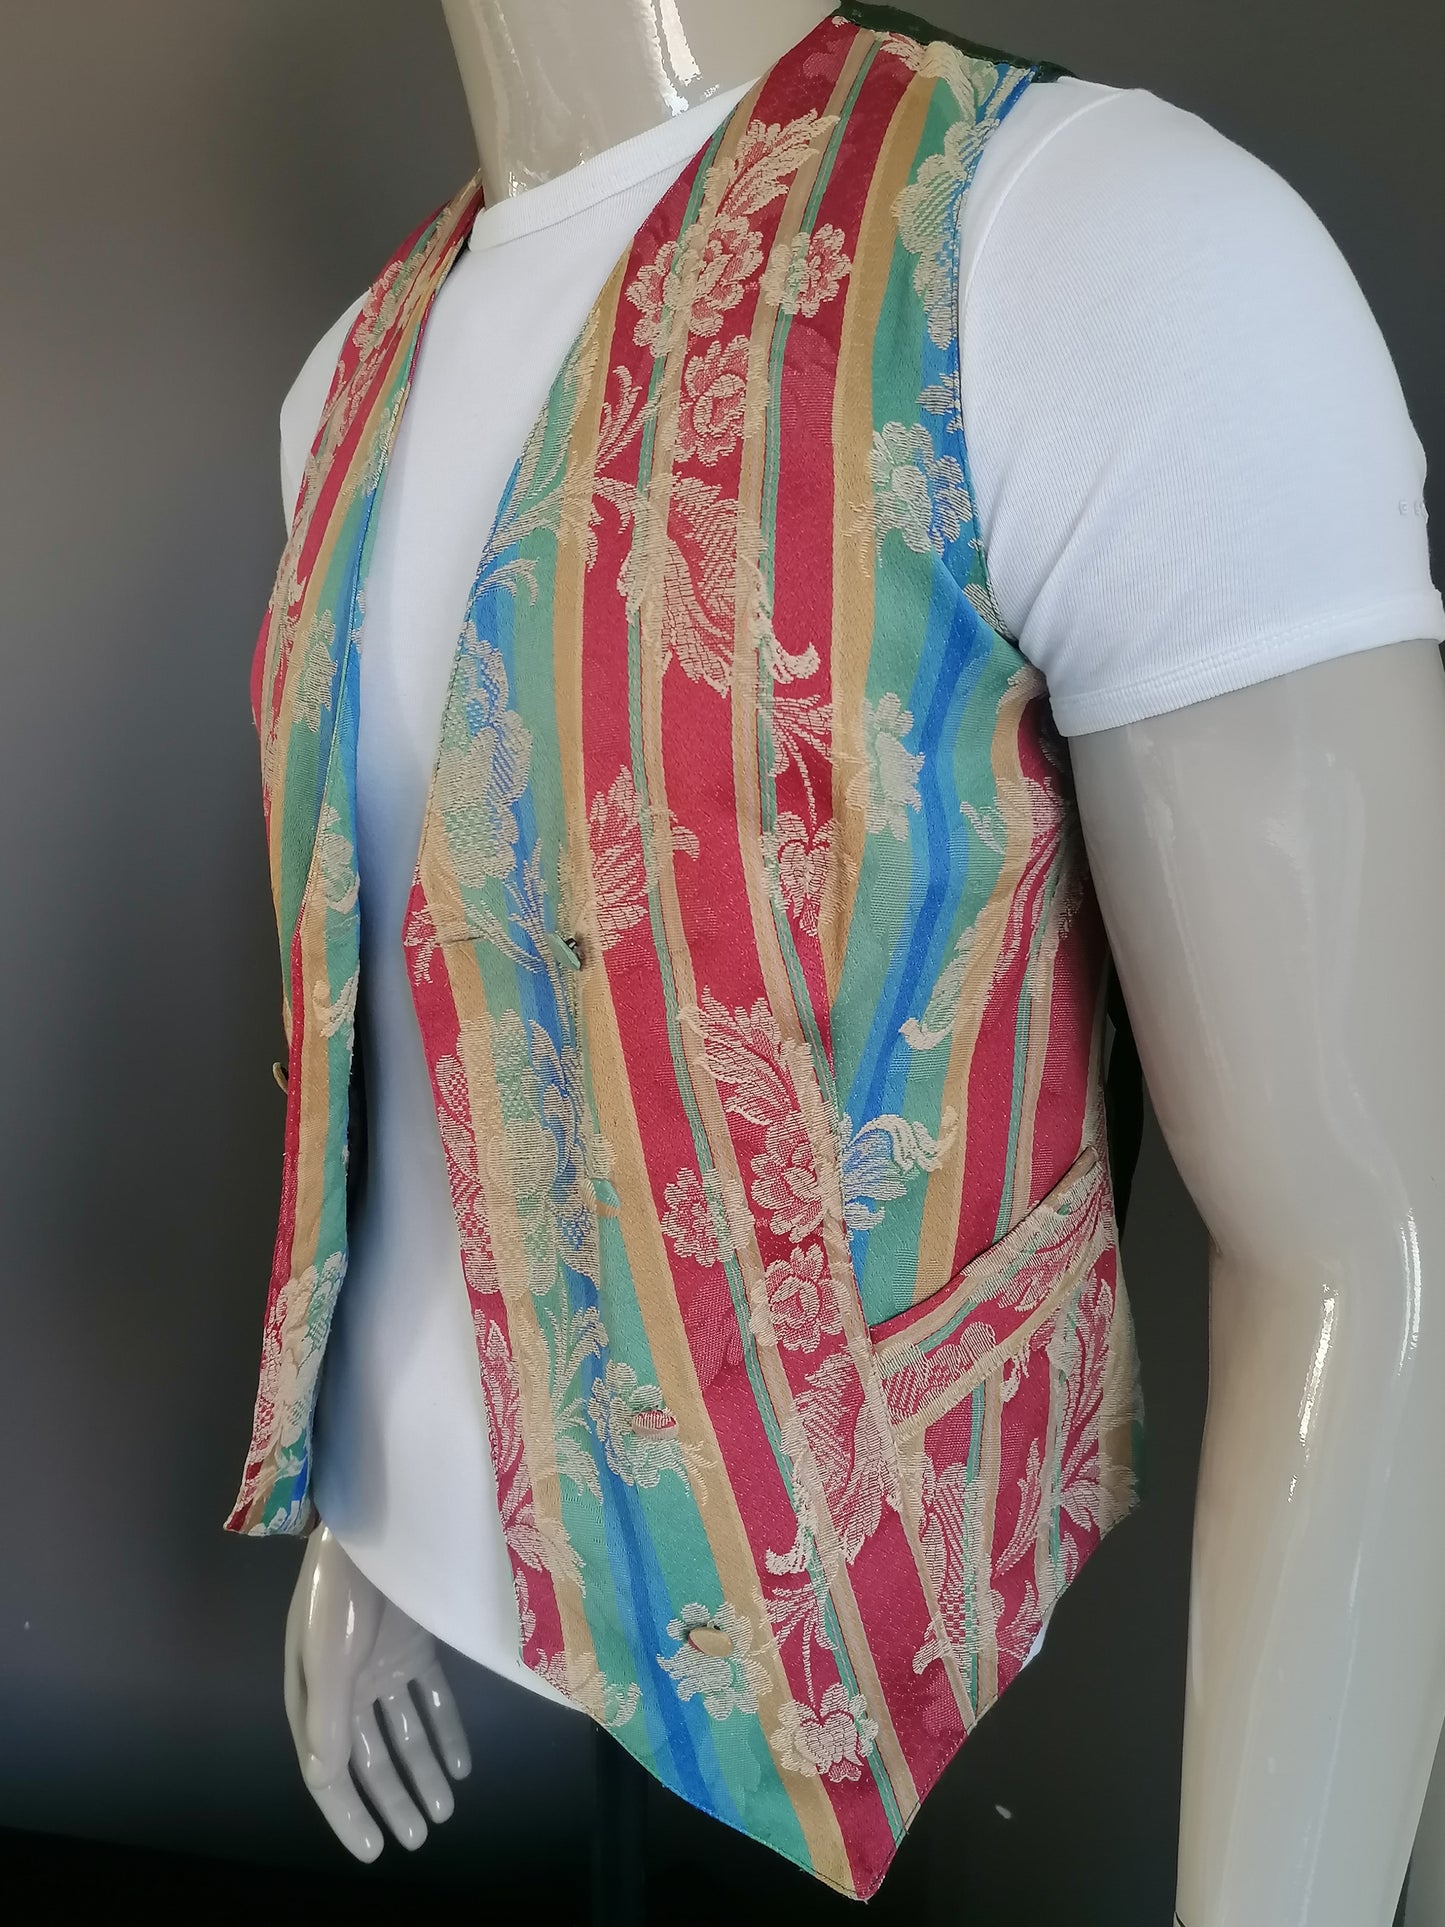 Vintage Pulls Double Breasted waistcoat. Red yellow green blue colored. Size S.